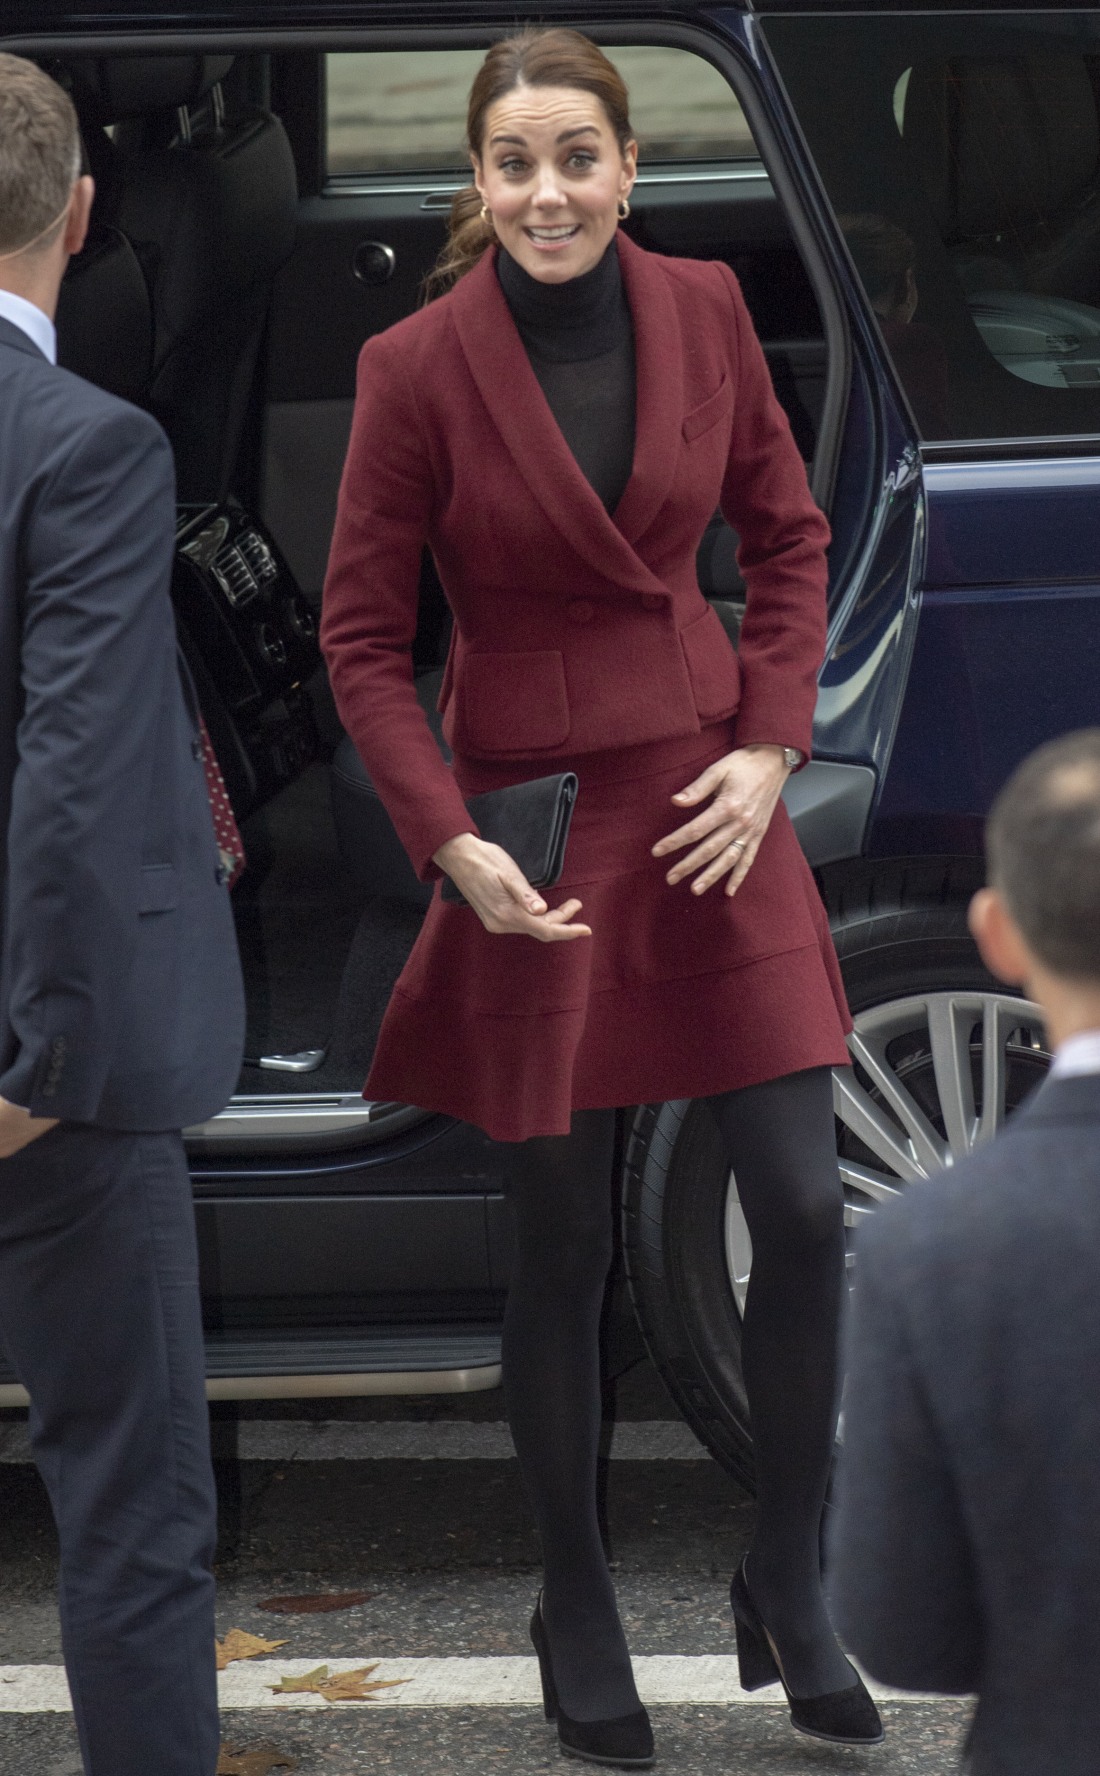 The Duchess of Cambridge visited a UCL Developmental Neuroscience Lab The Duchess of Cambridge visited Professor Eamon McCrory, Co-Director of the Developmental Risk and Resilience Unit in the Psychology & Language Sciences Division at UCL